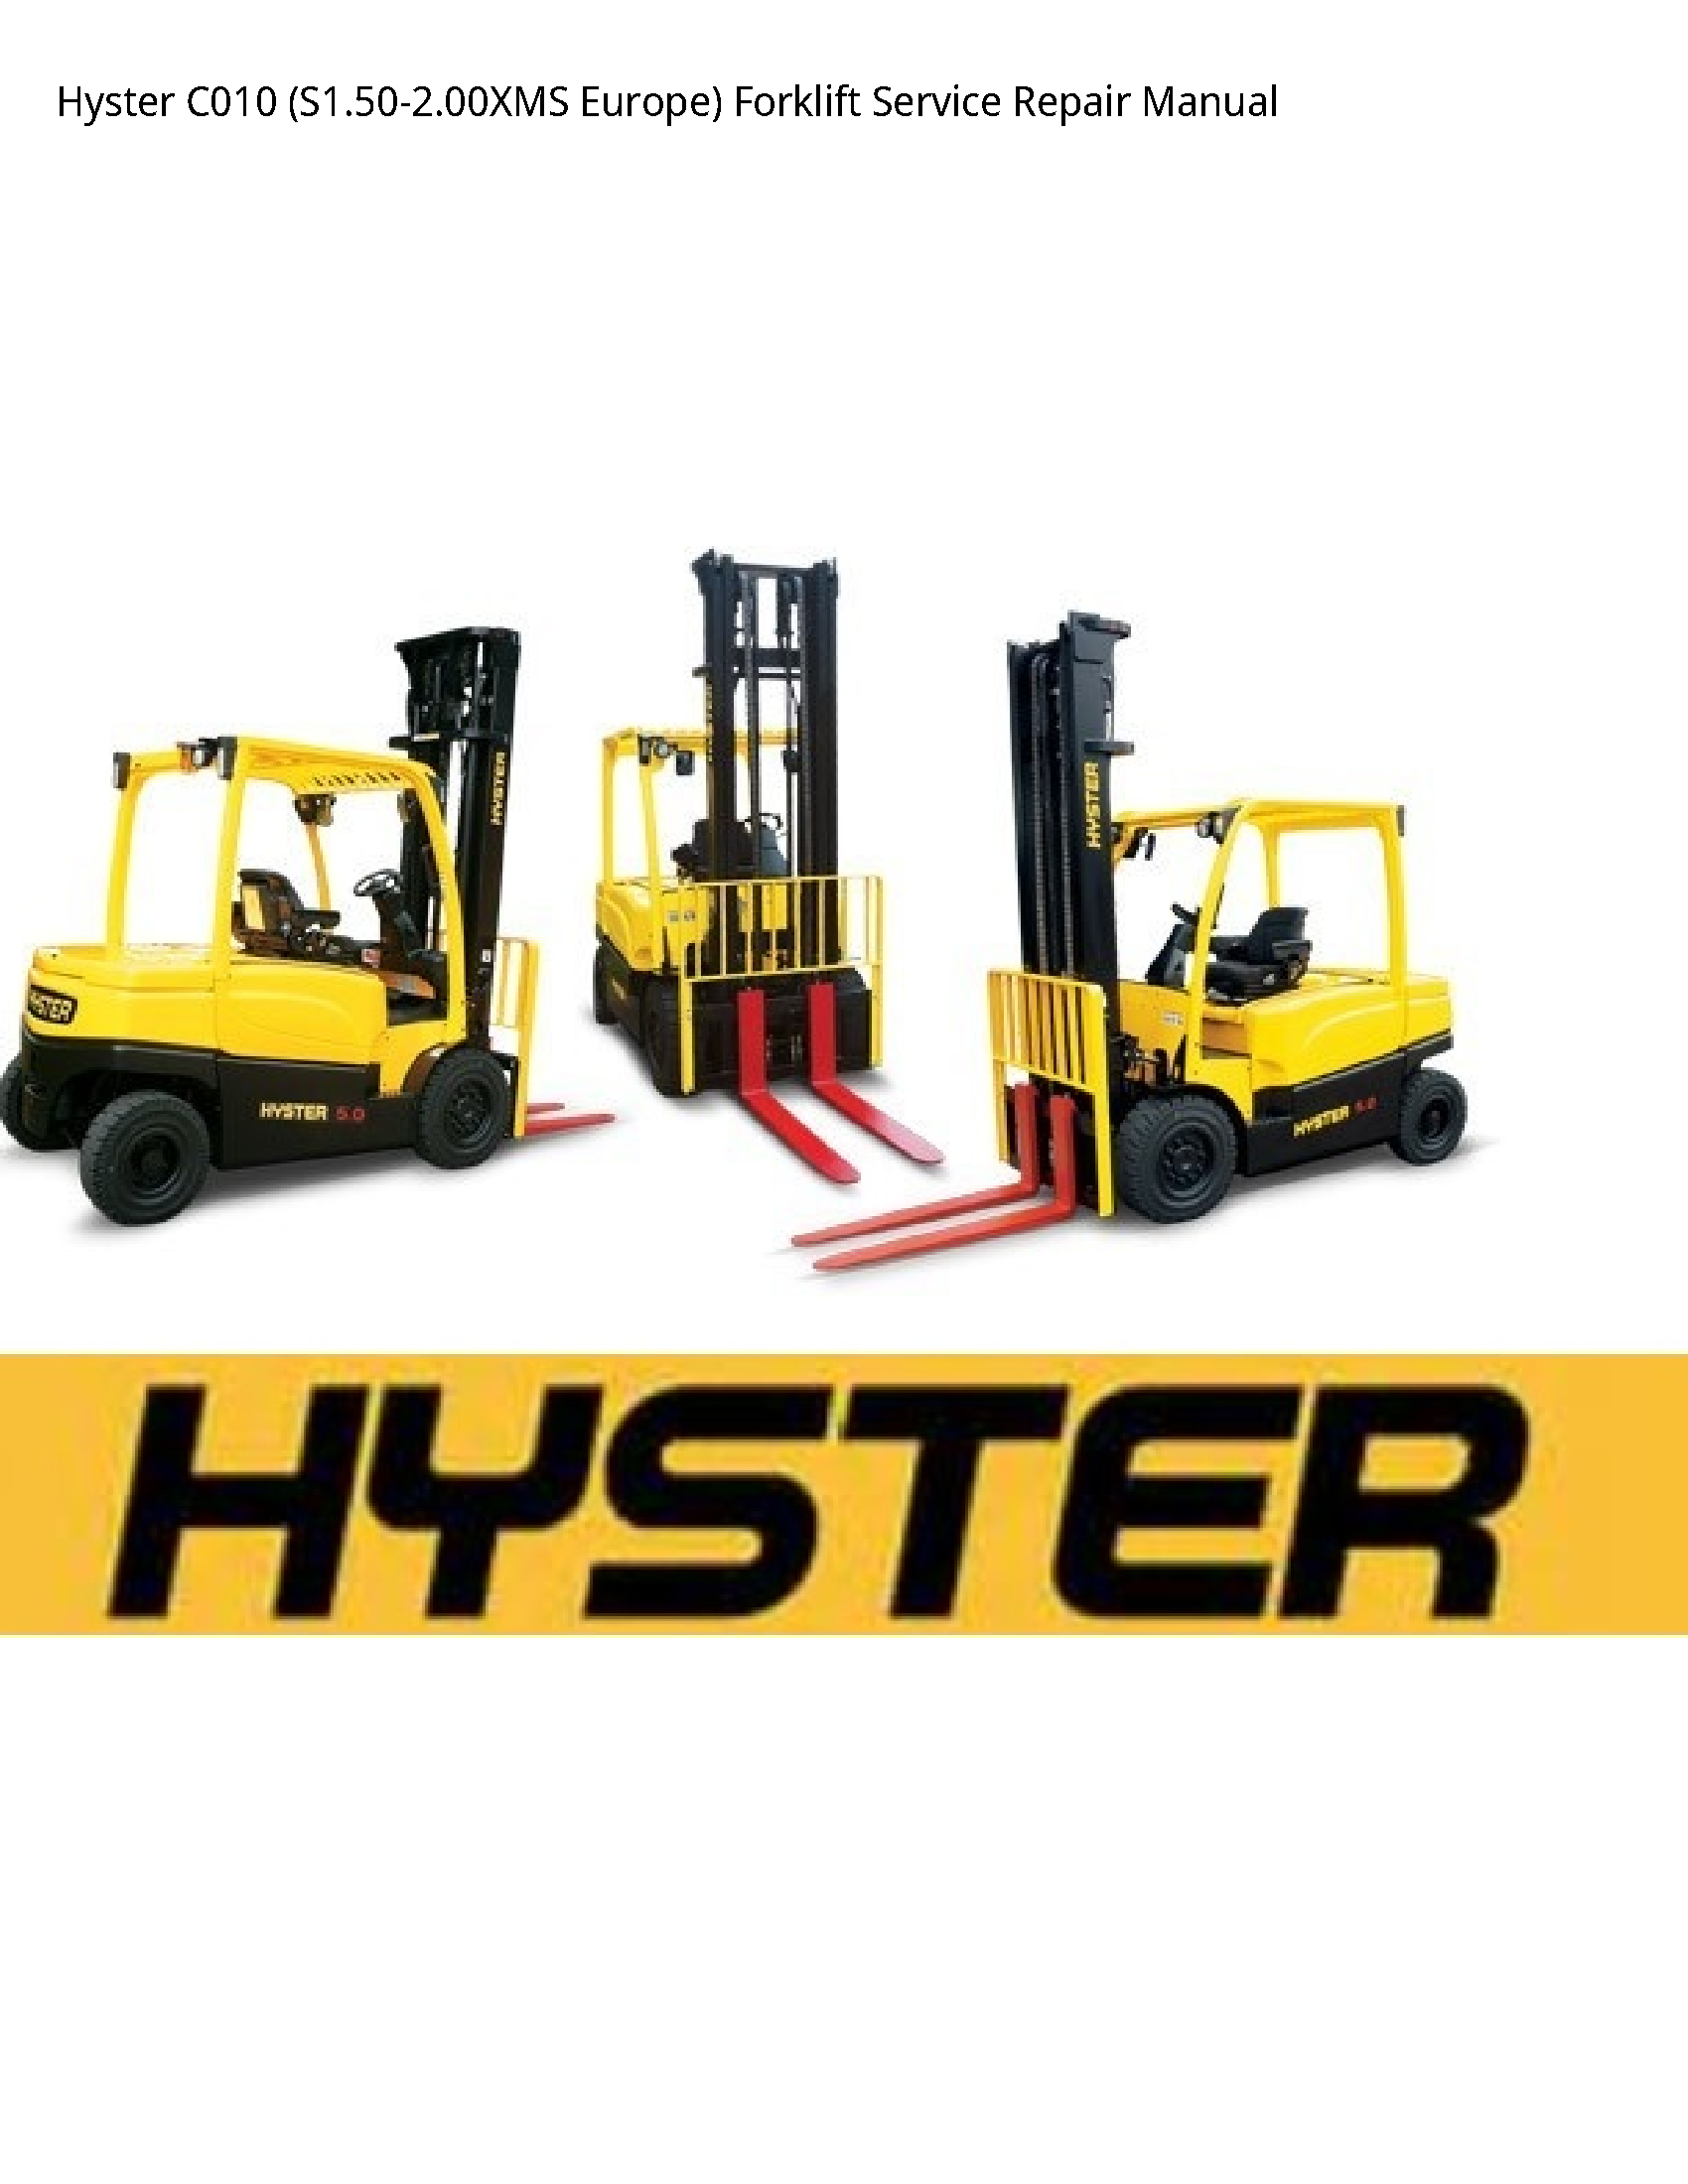 Hyster C010 Europe) Forklift manual